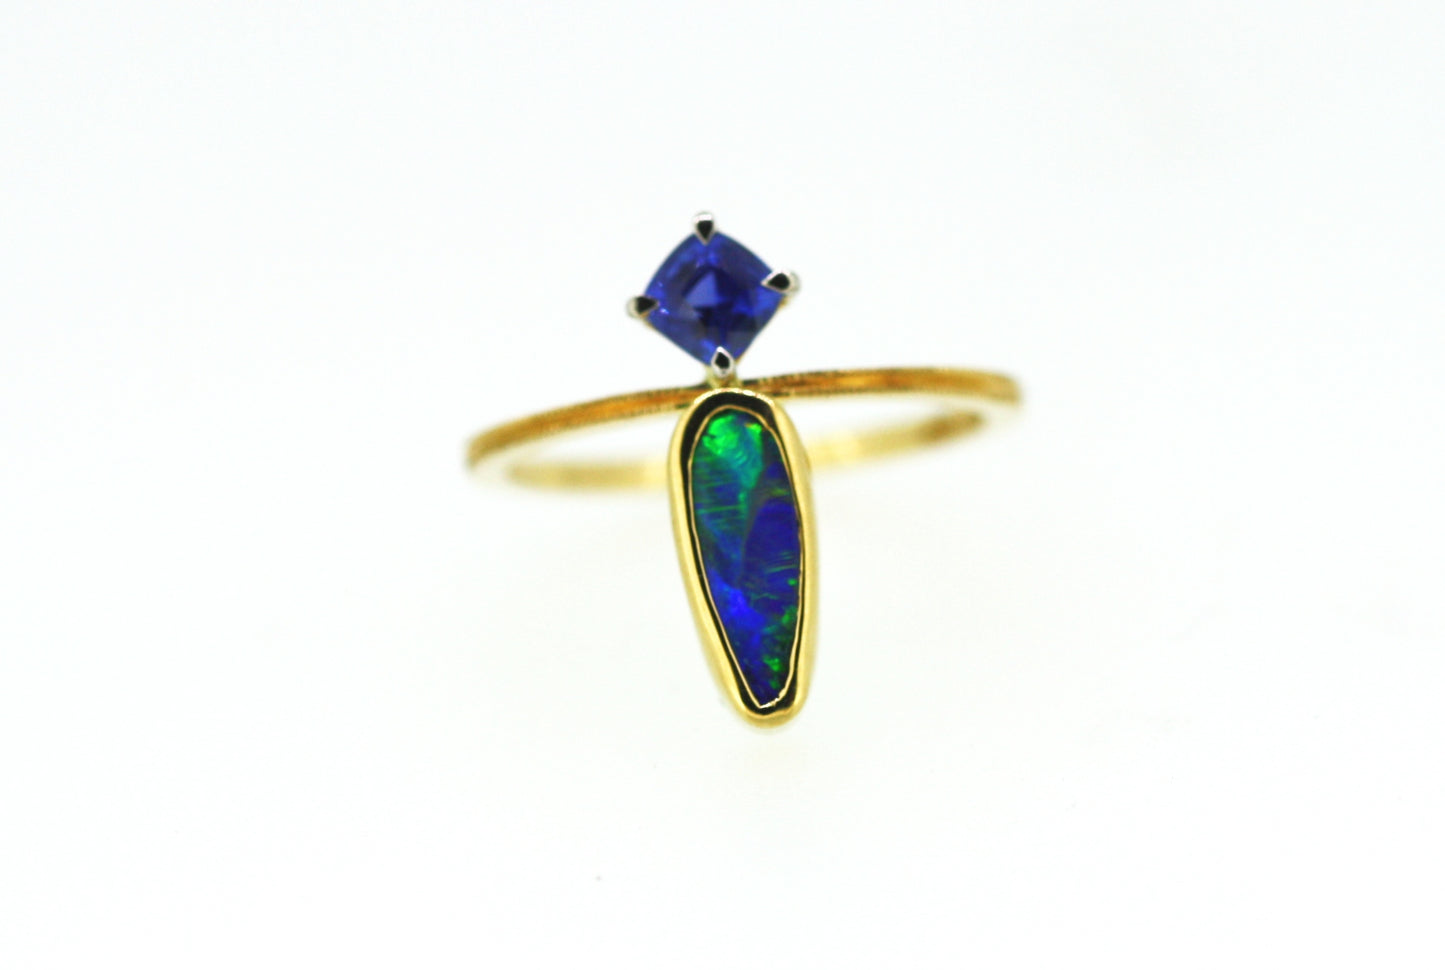 UPDATE: Fringe Ring - Sapphire and Opal Dainty Ring